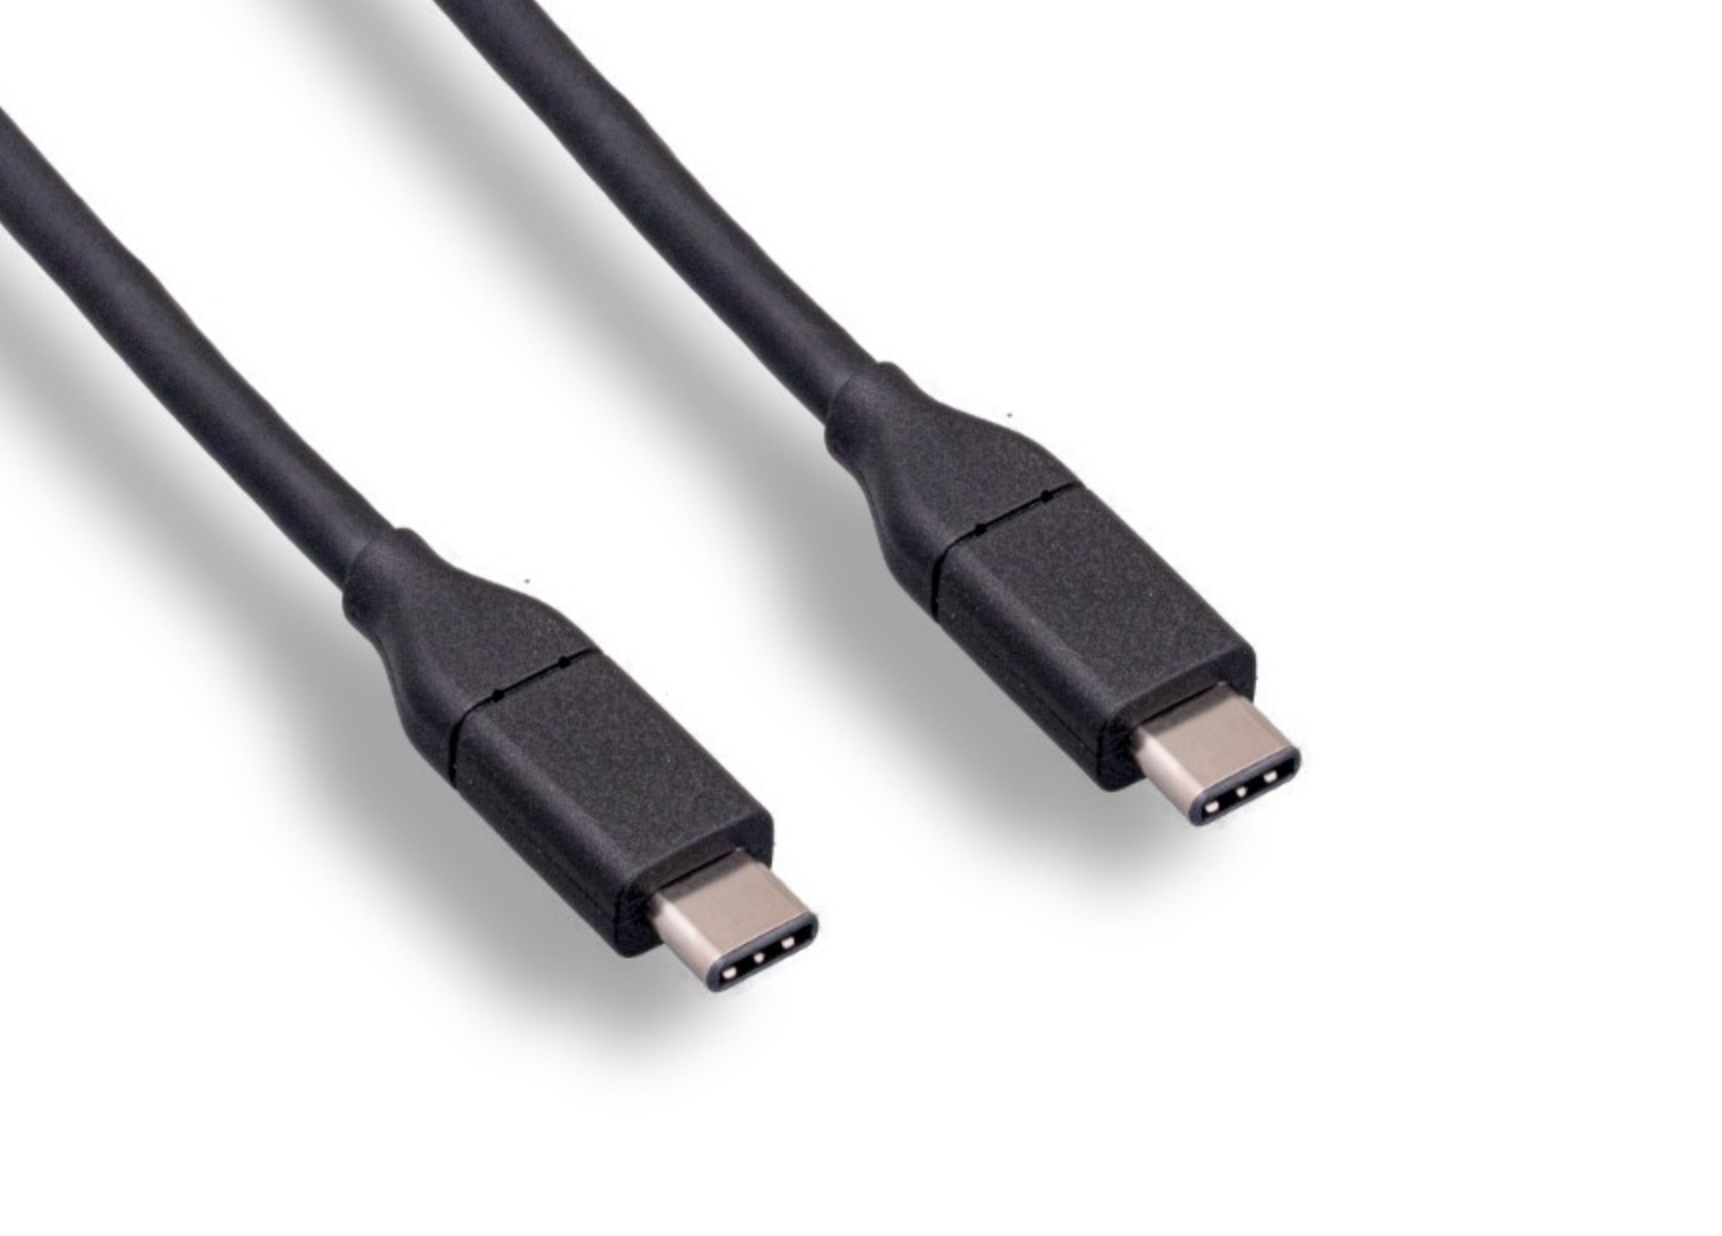 USB 3.1 Type C - Thunderbolt 3 - Custom Cable Connection